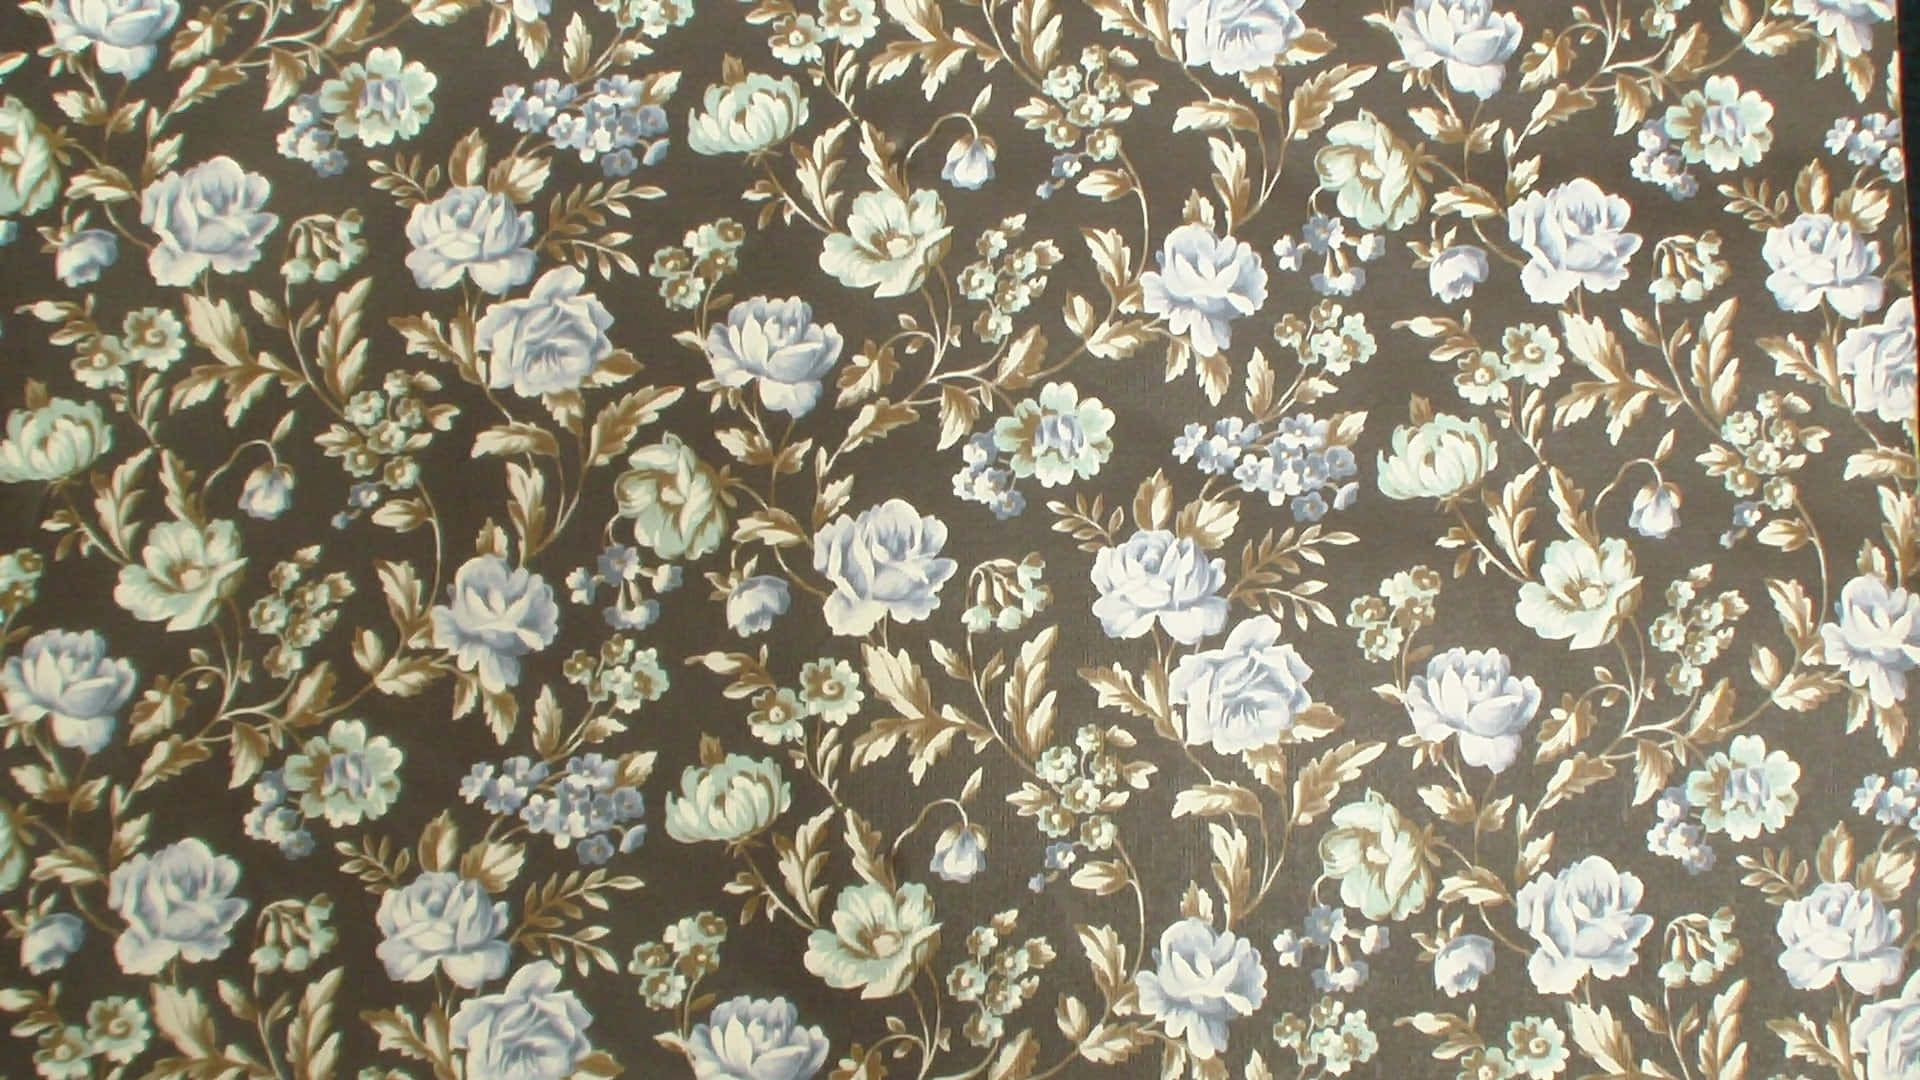 Get groovy in this 70s-inspired flowery pattern! Wallpaper